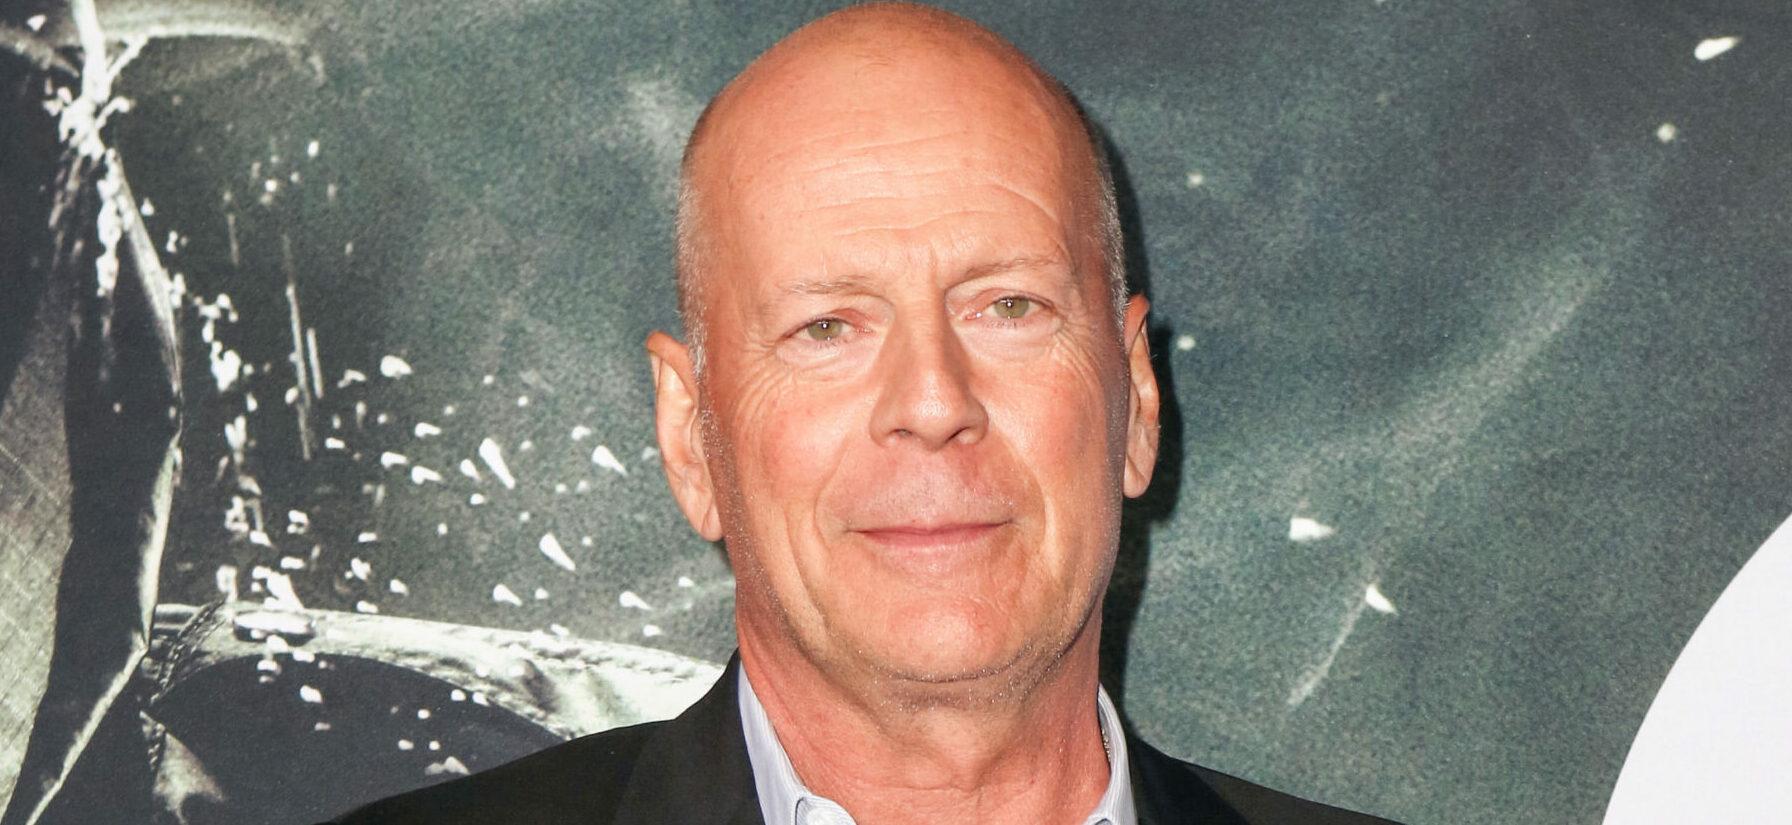 Bruce Willis Reportedly Has ‘More Bad Days Than Good’ Amid Dementia Battle As Family Rallies Around Him